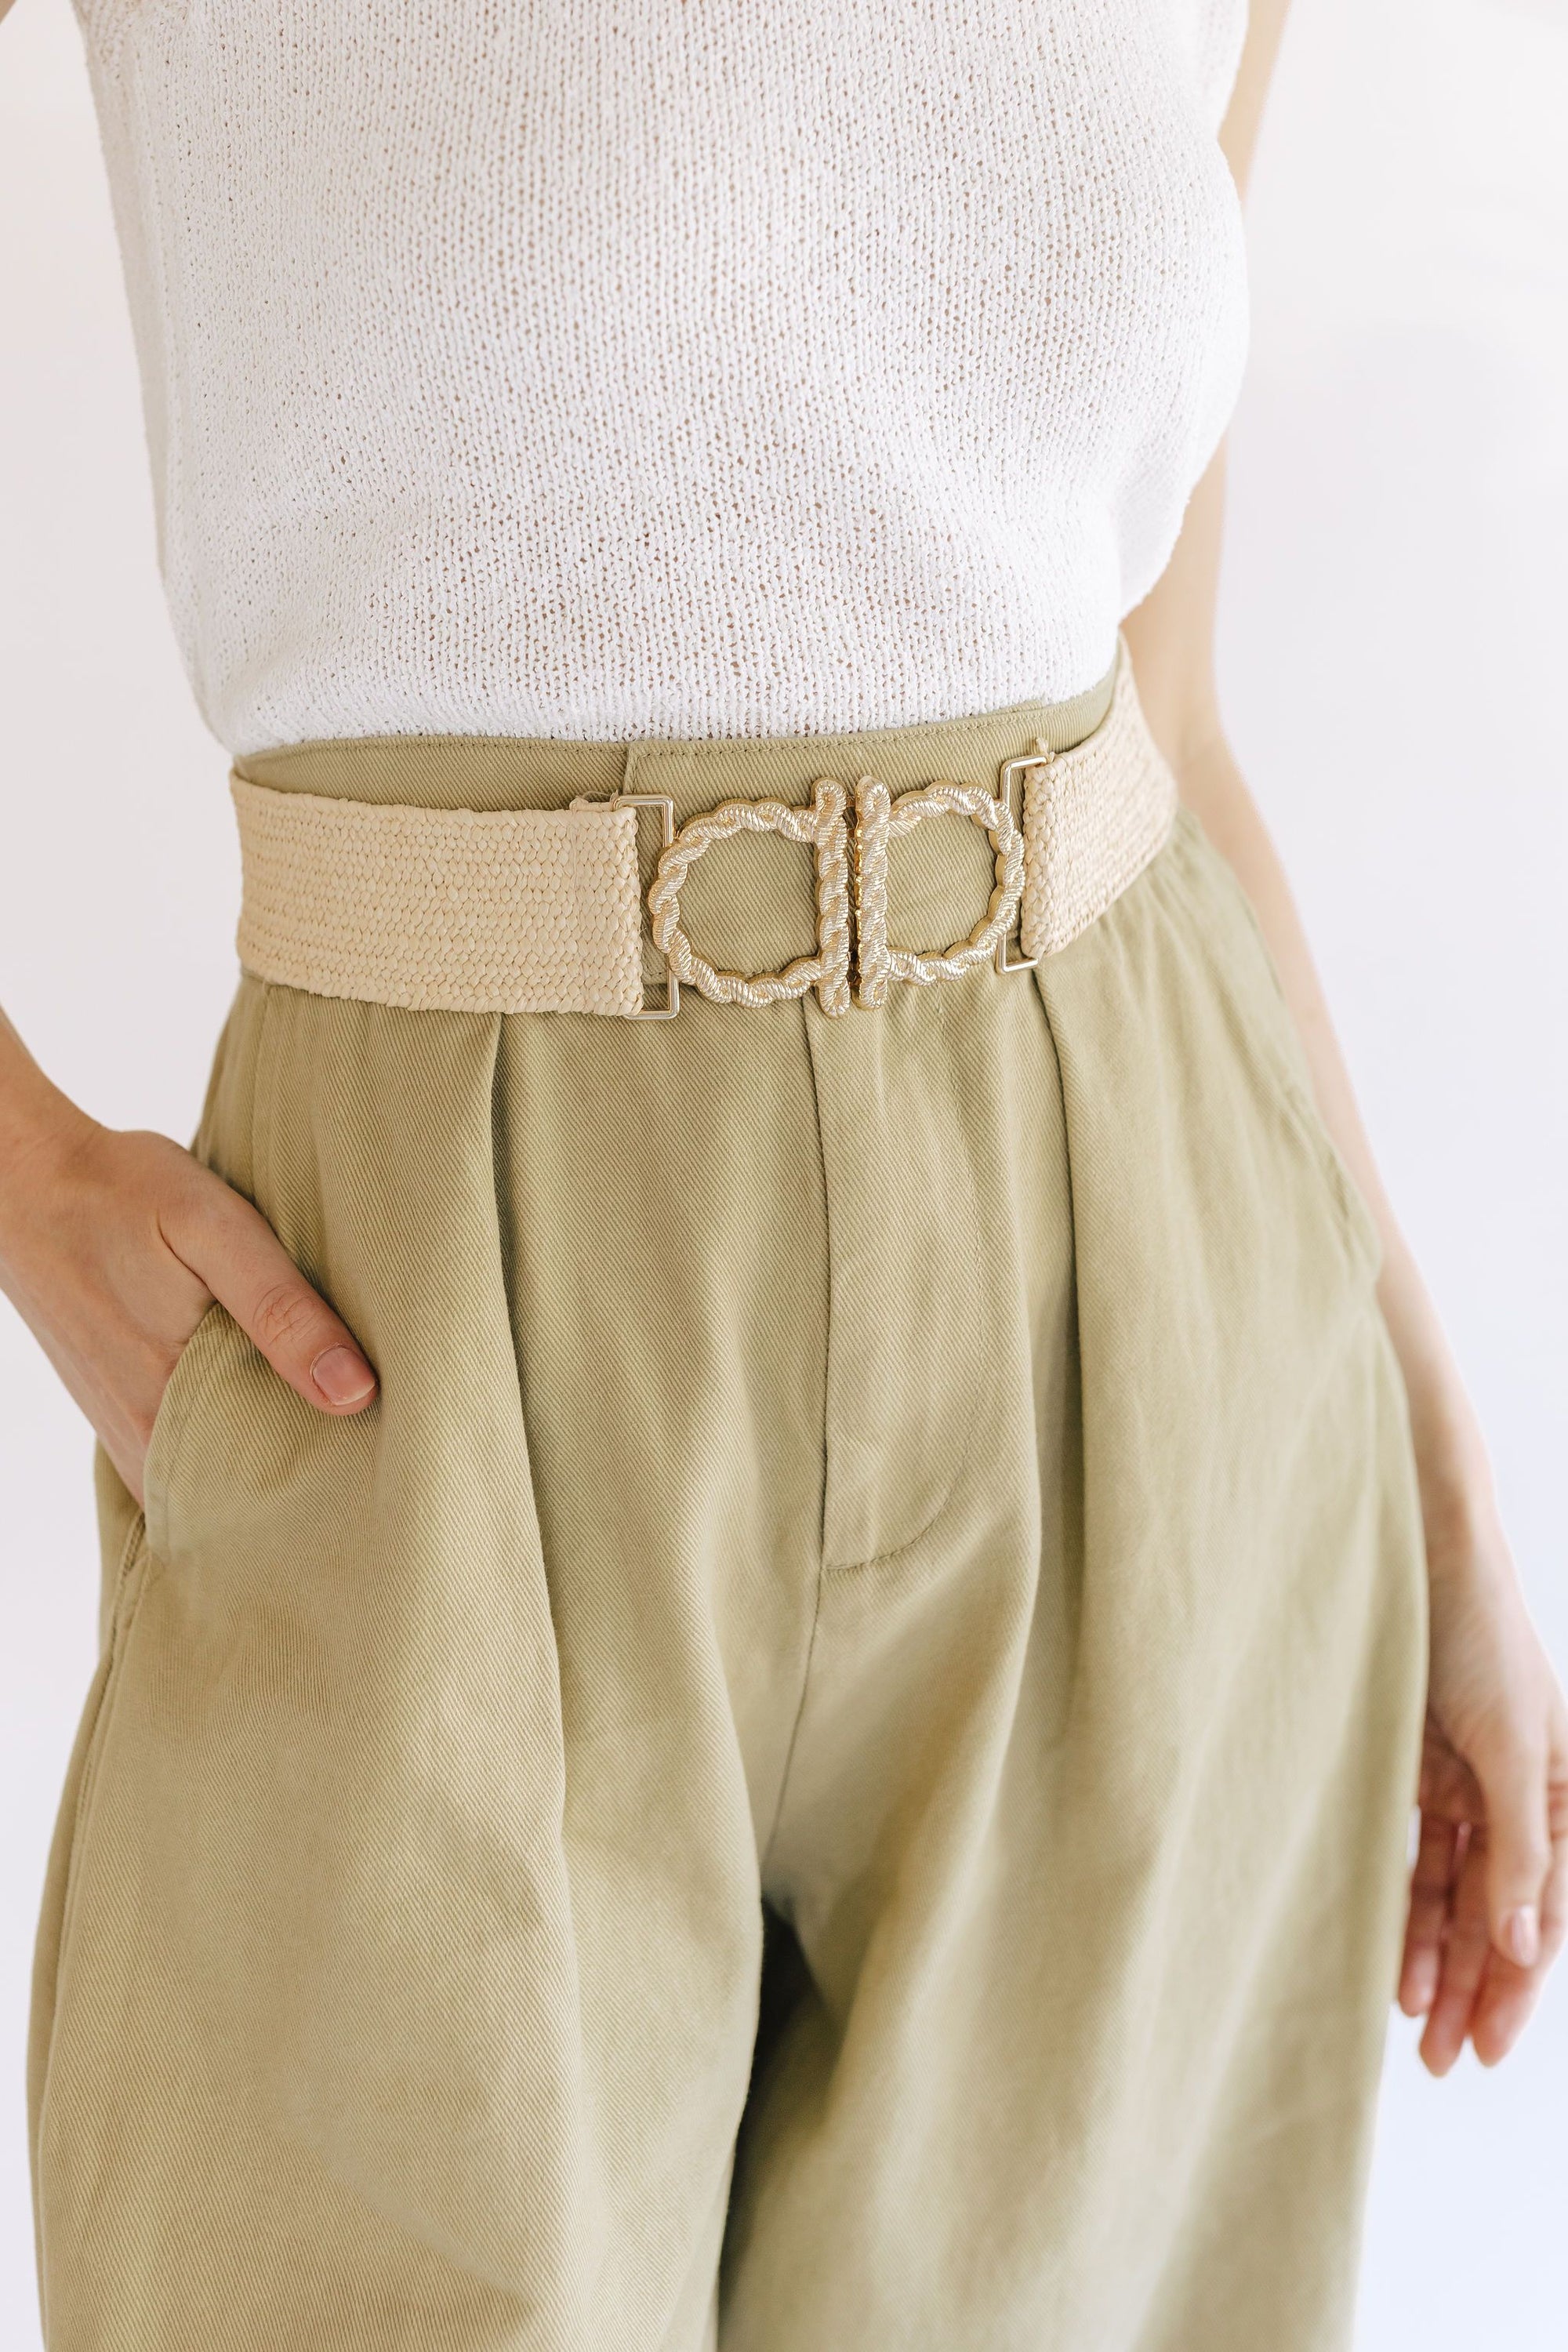 The Cleo Straw Woven Belt